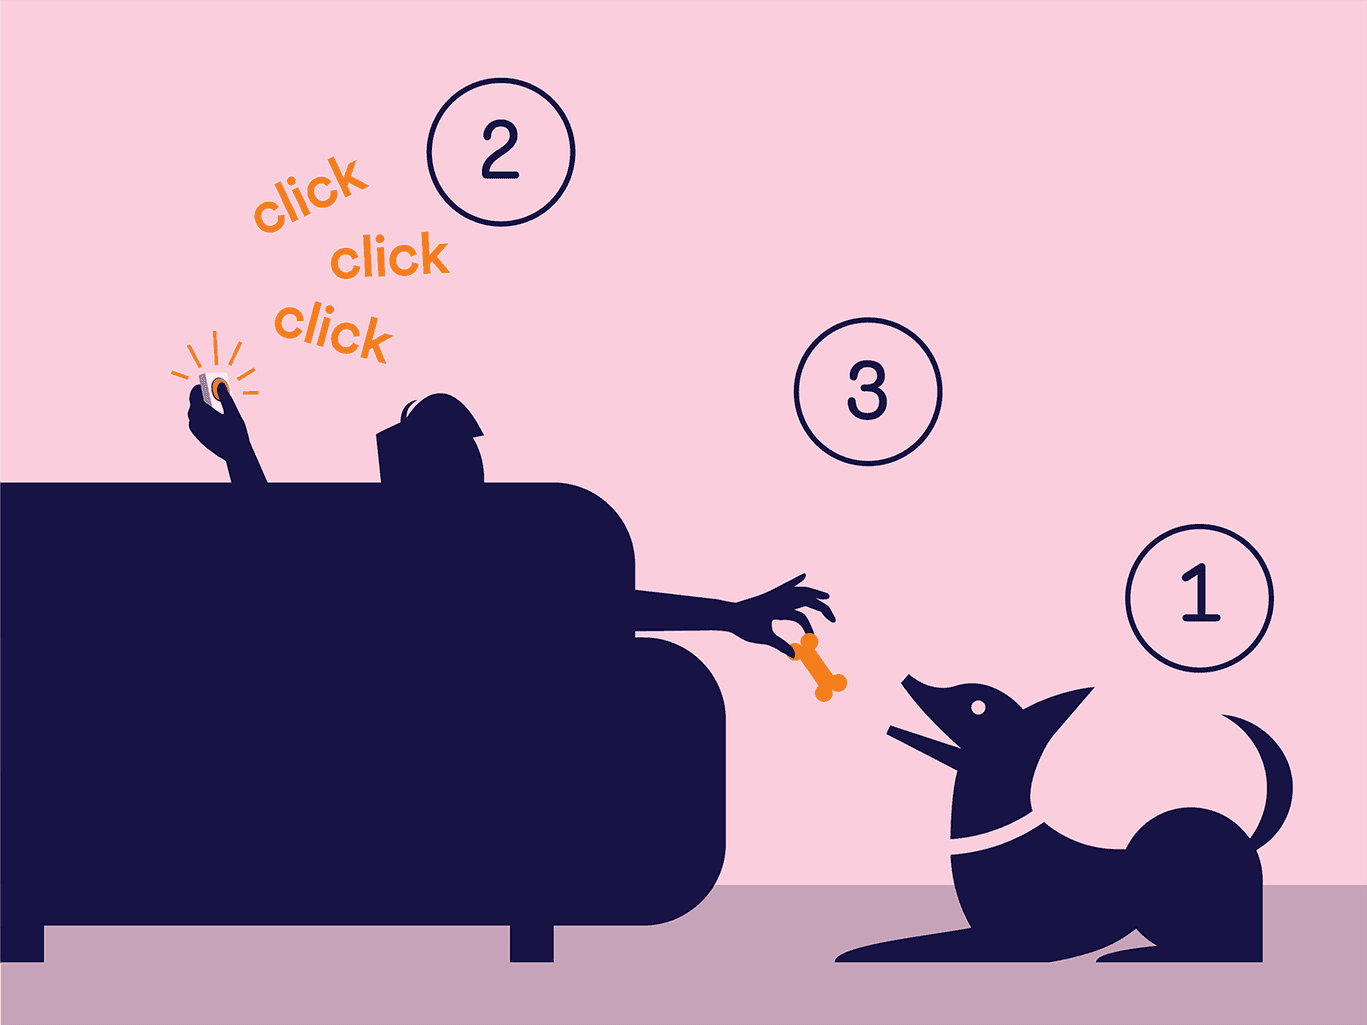 Illustration of person sitting on couch and clicking while giving a bone to the dog